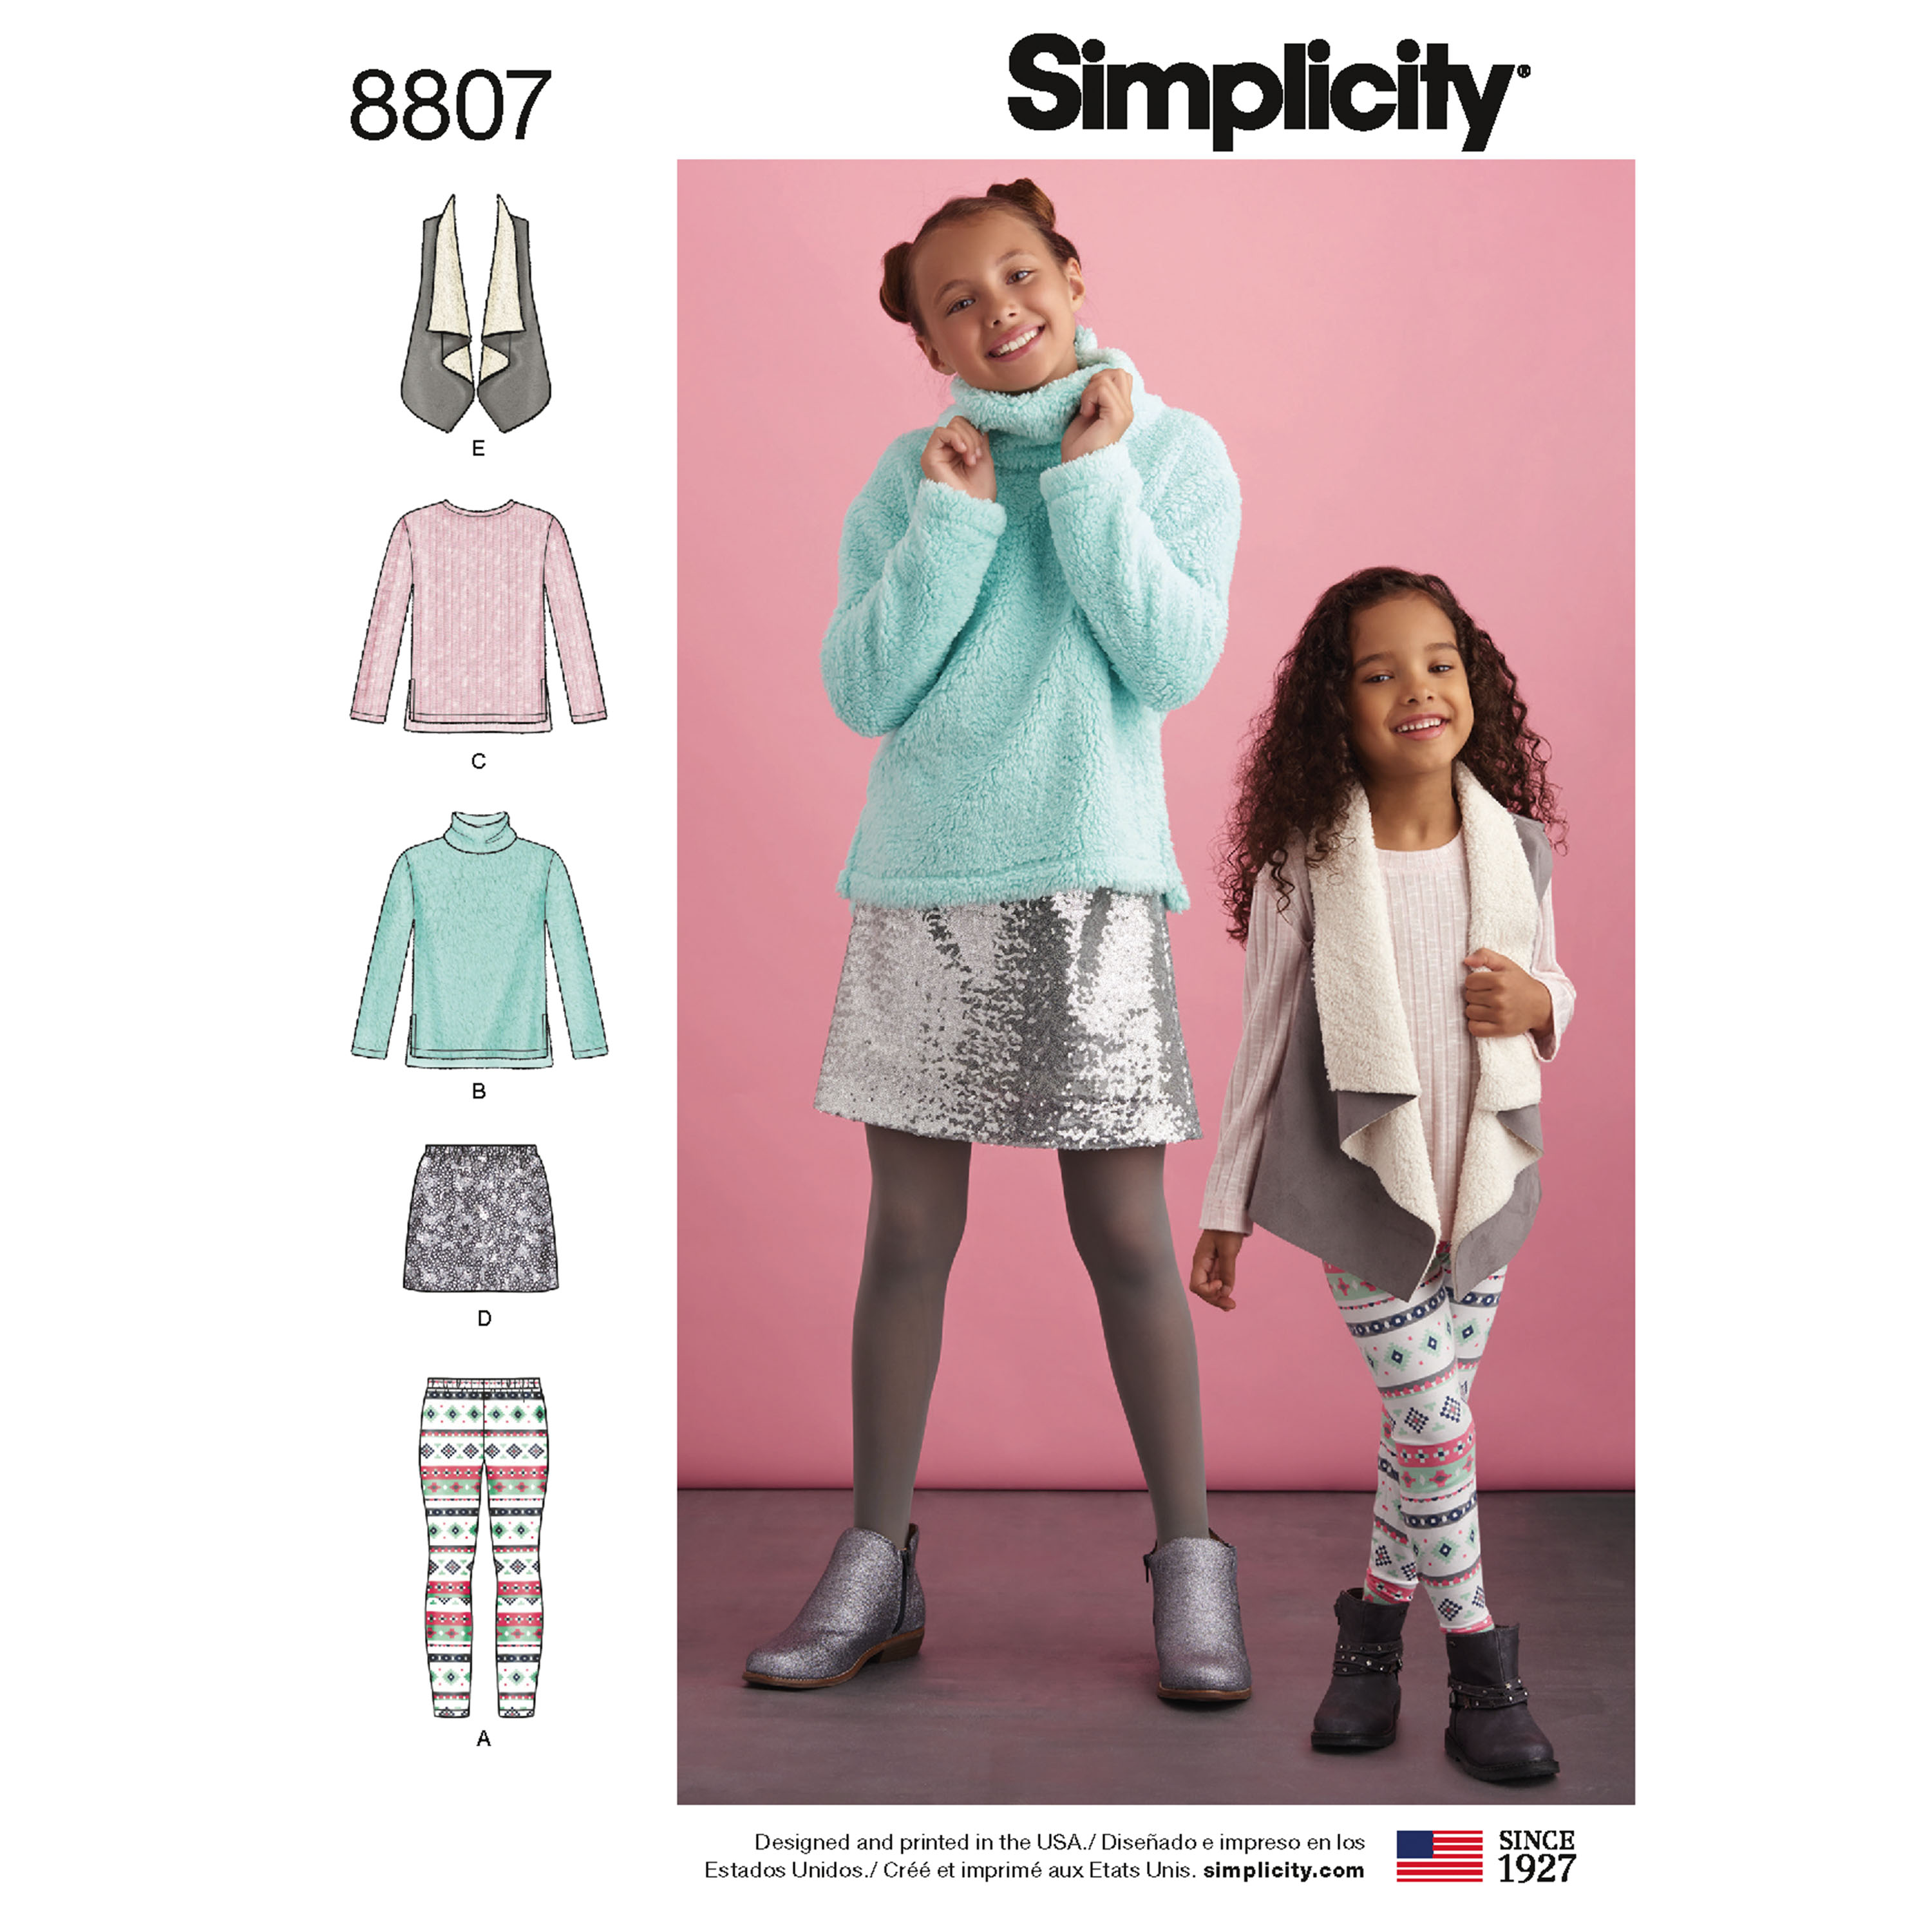 https://images.patternreview.com/sewing/patterns/simplicity/2018/8807/8807.jpg